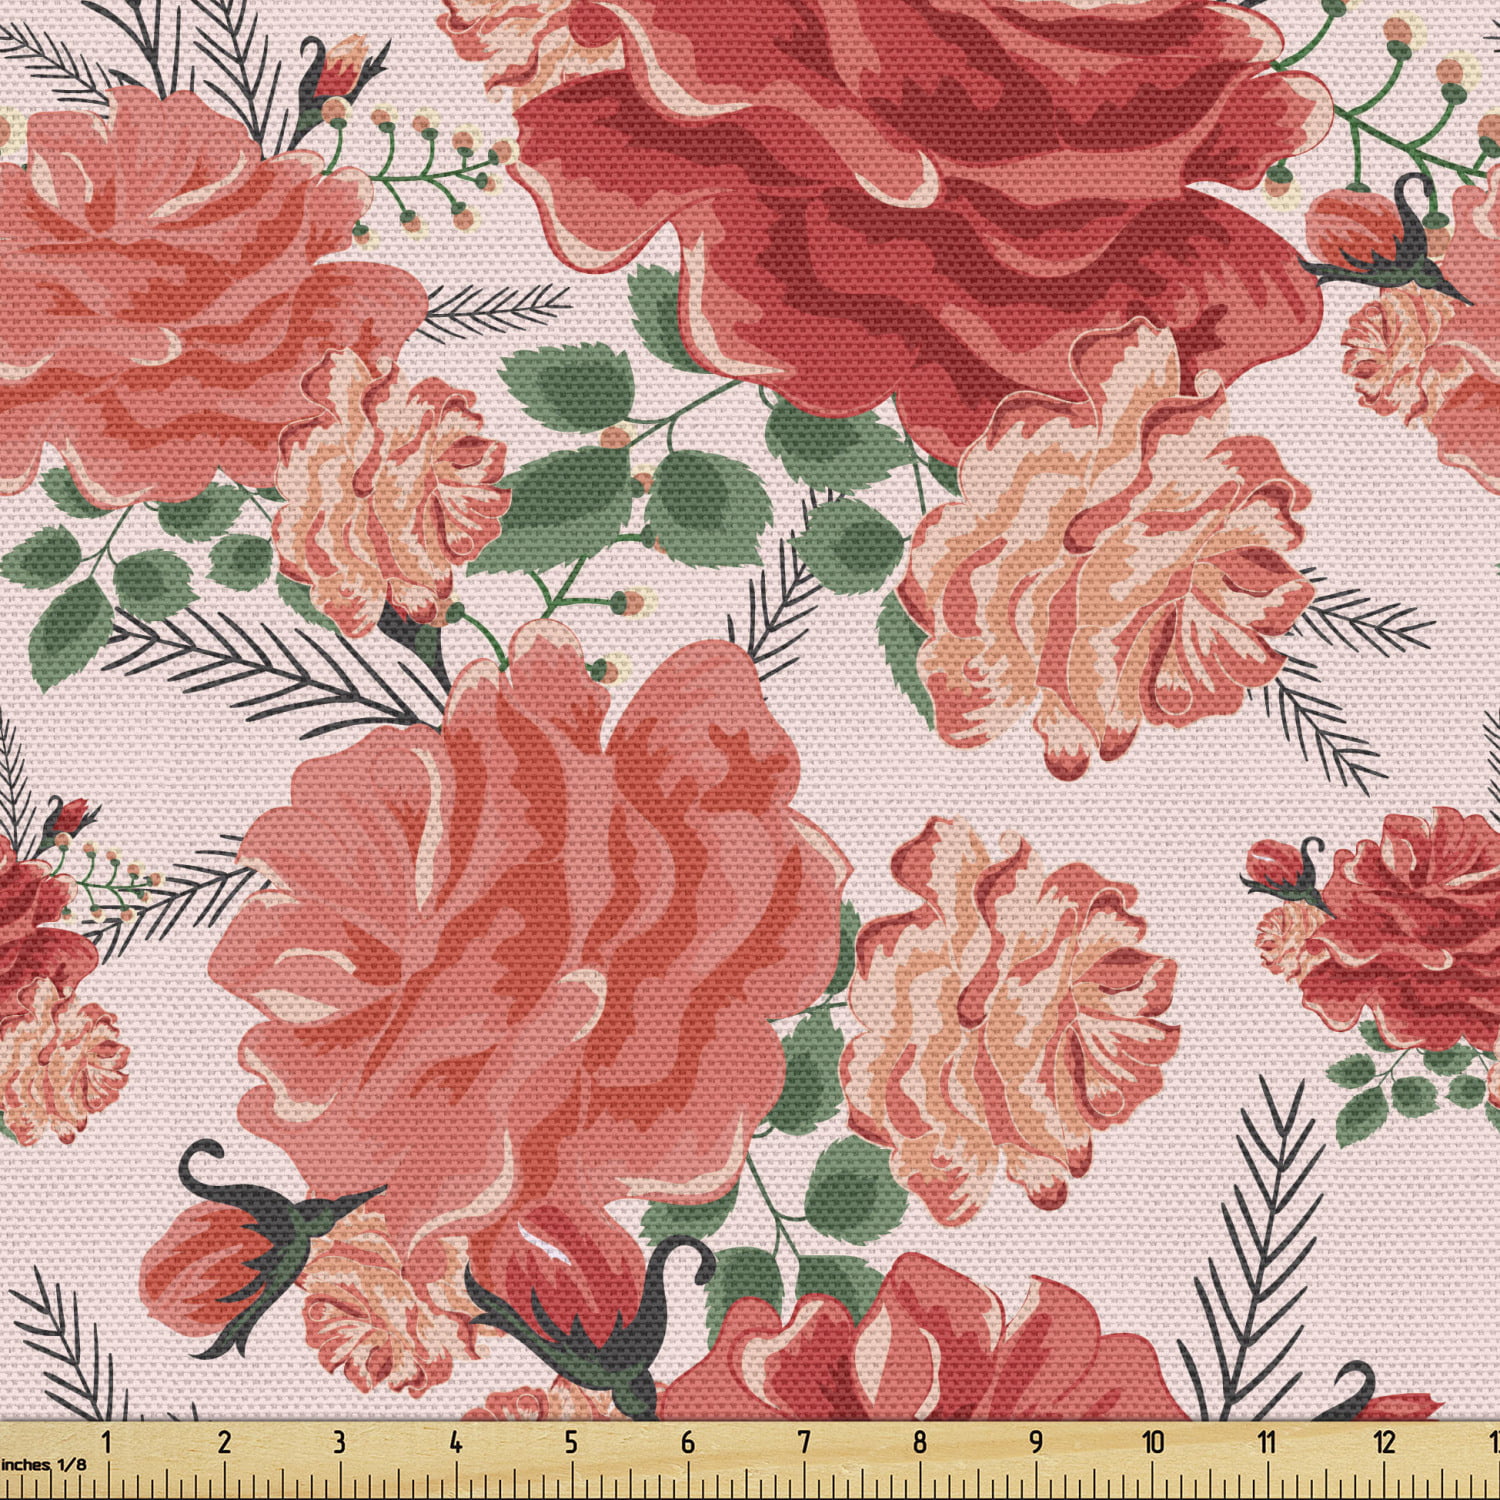 FABRIC TRADITIONS ASSORTED PRINTS RED AND YELLOW ROSES ON RED COTTON FABRIC BTY 